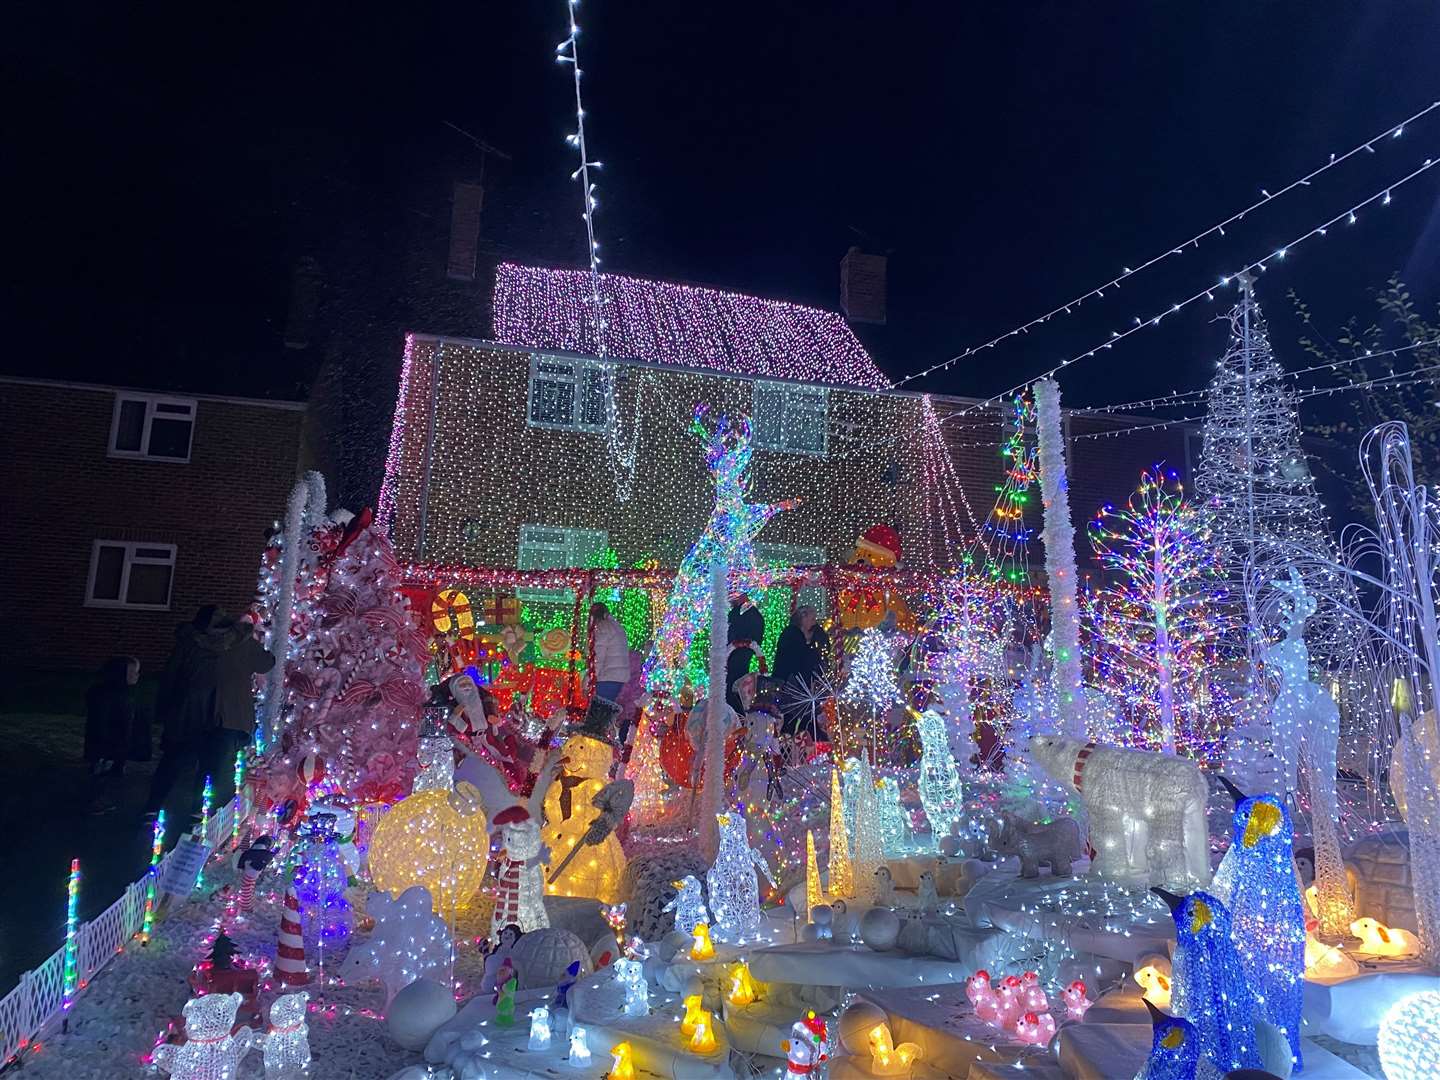 The Clark’s Christmas display in Colonels Lane, Boughton-under-Blean